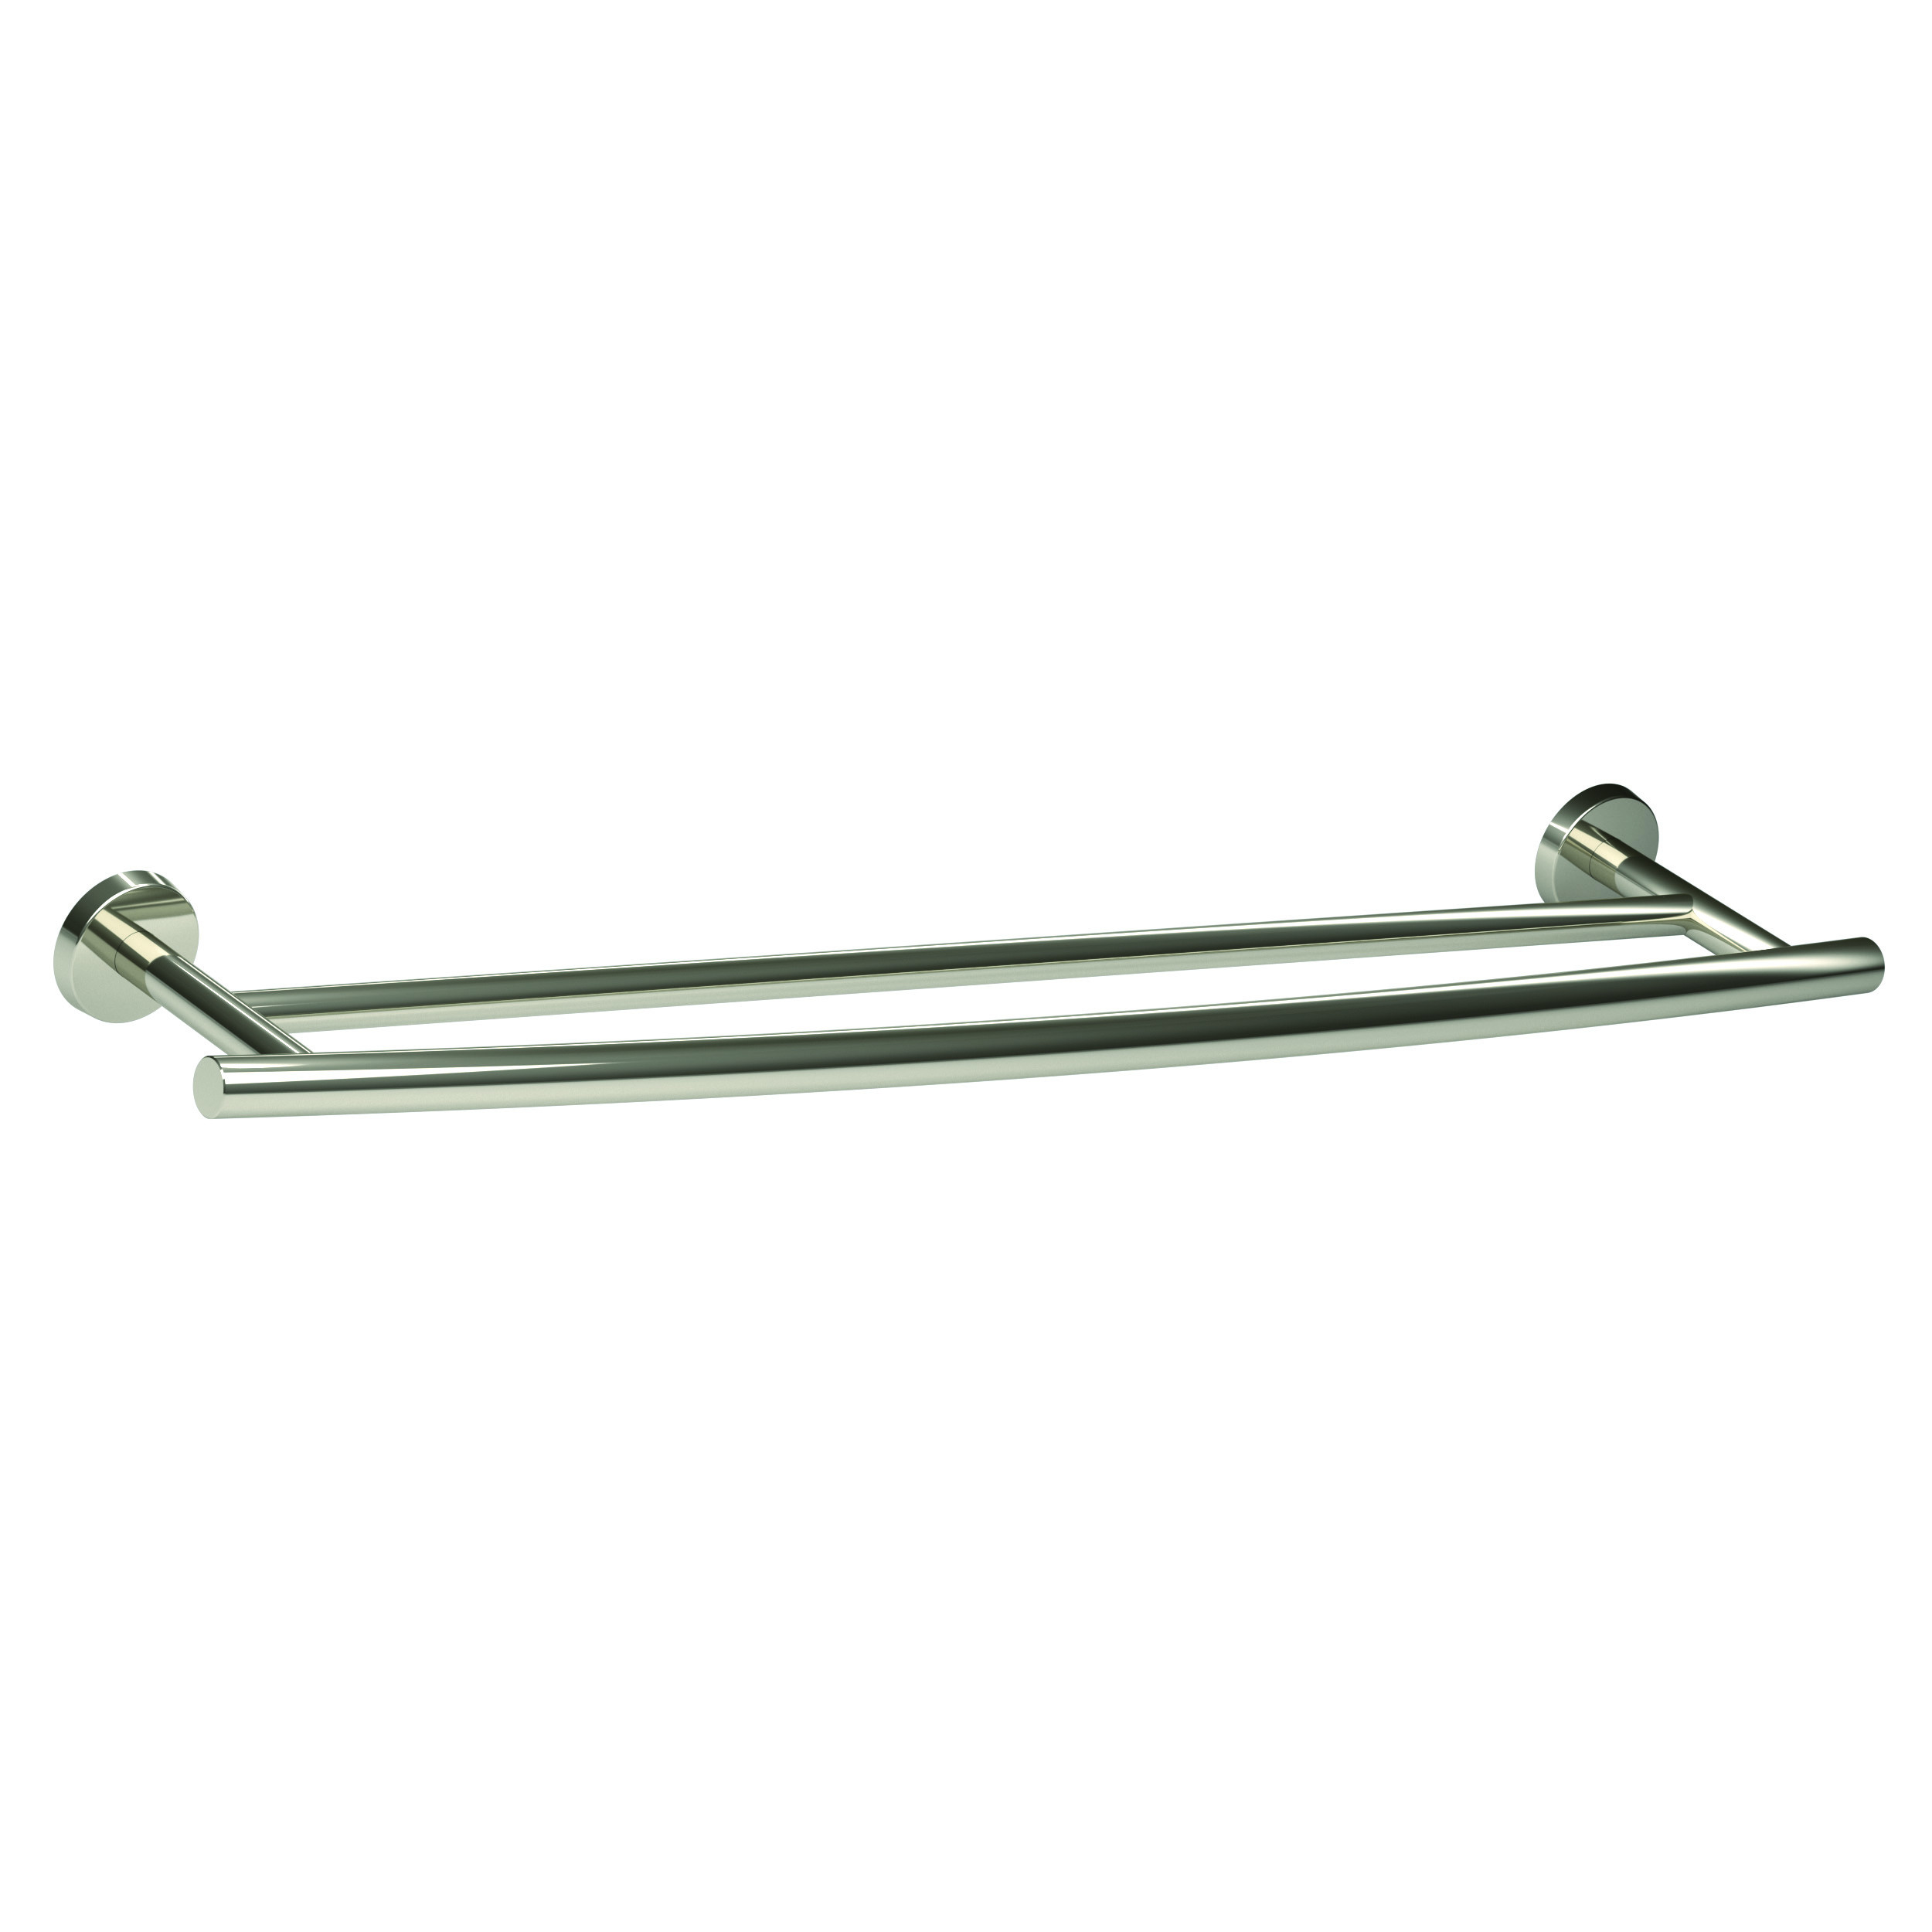 Stainless Steel Cabinet Hardware, Knobs, Pulls